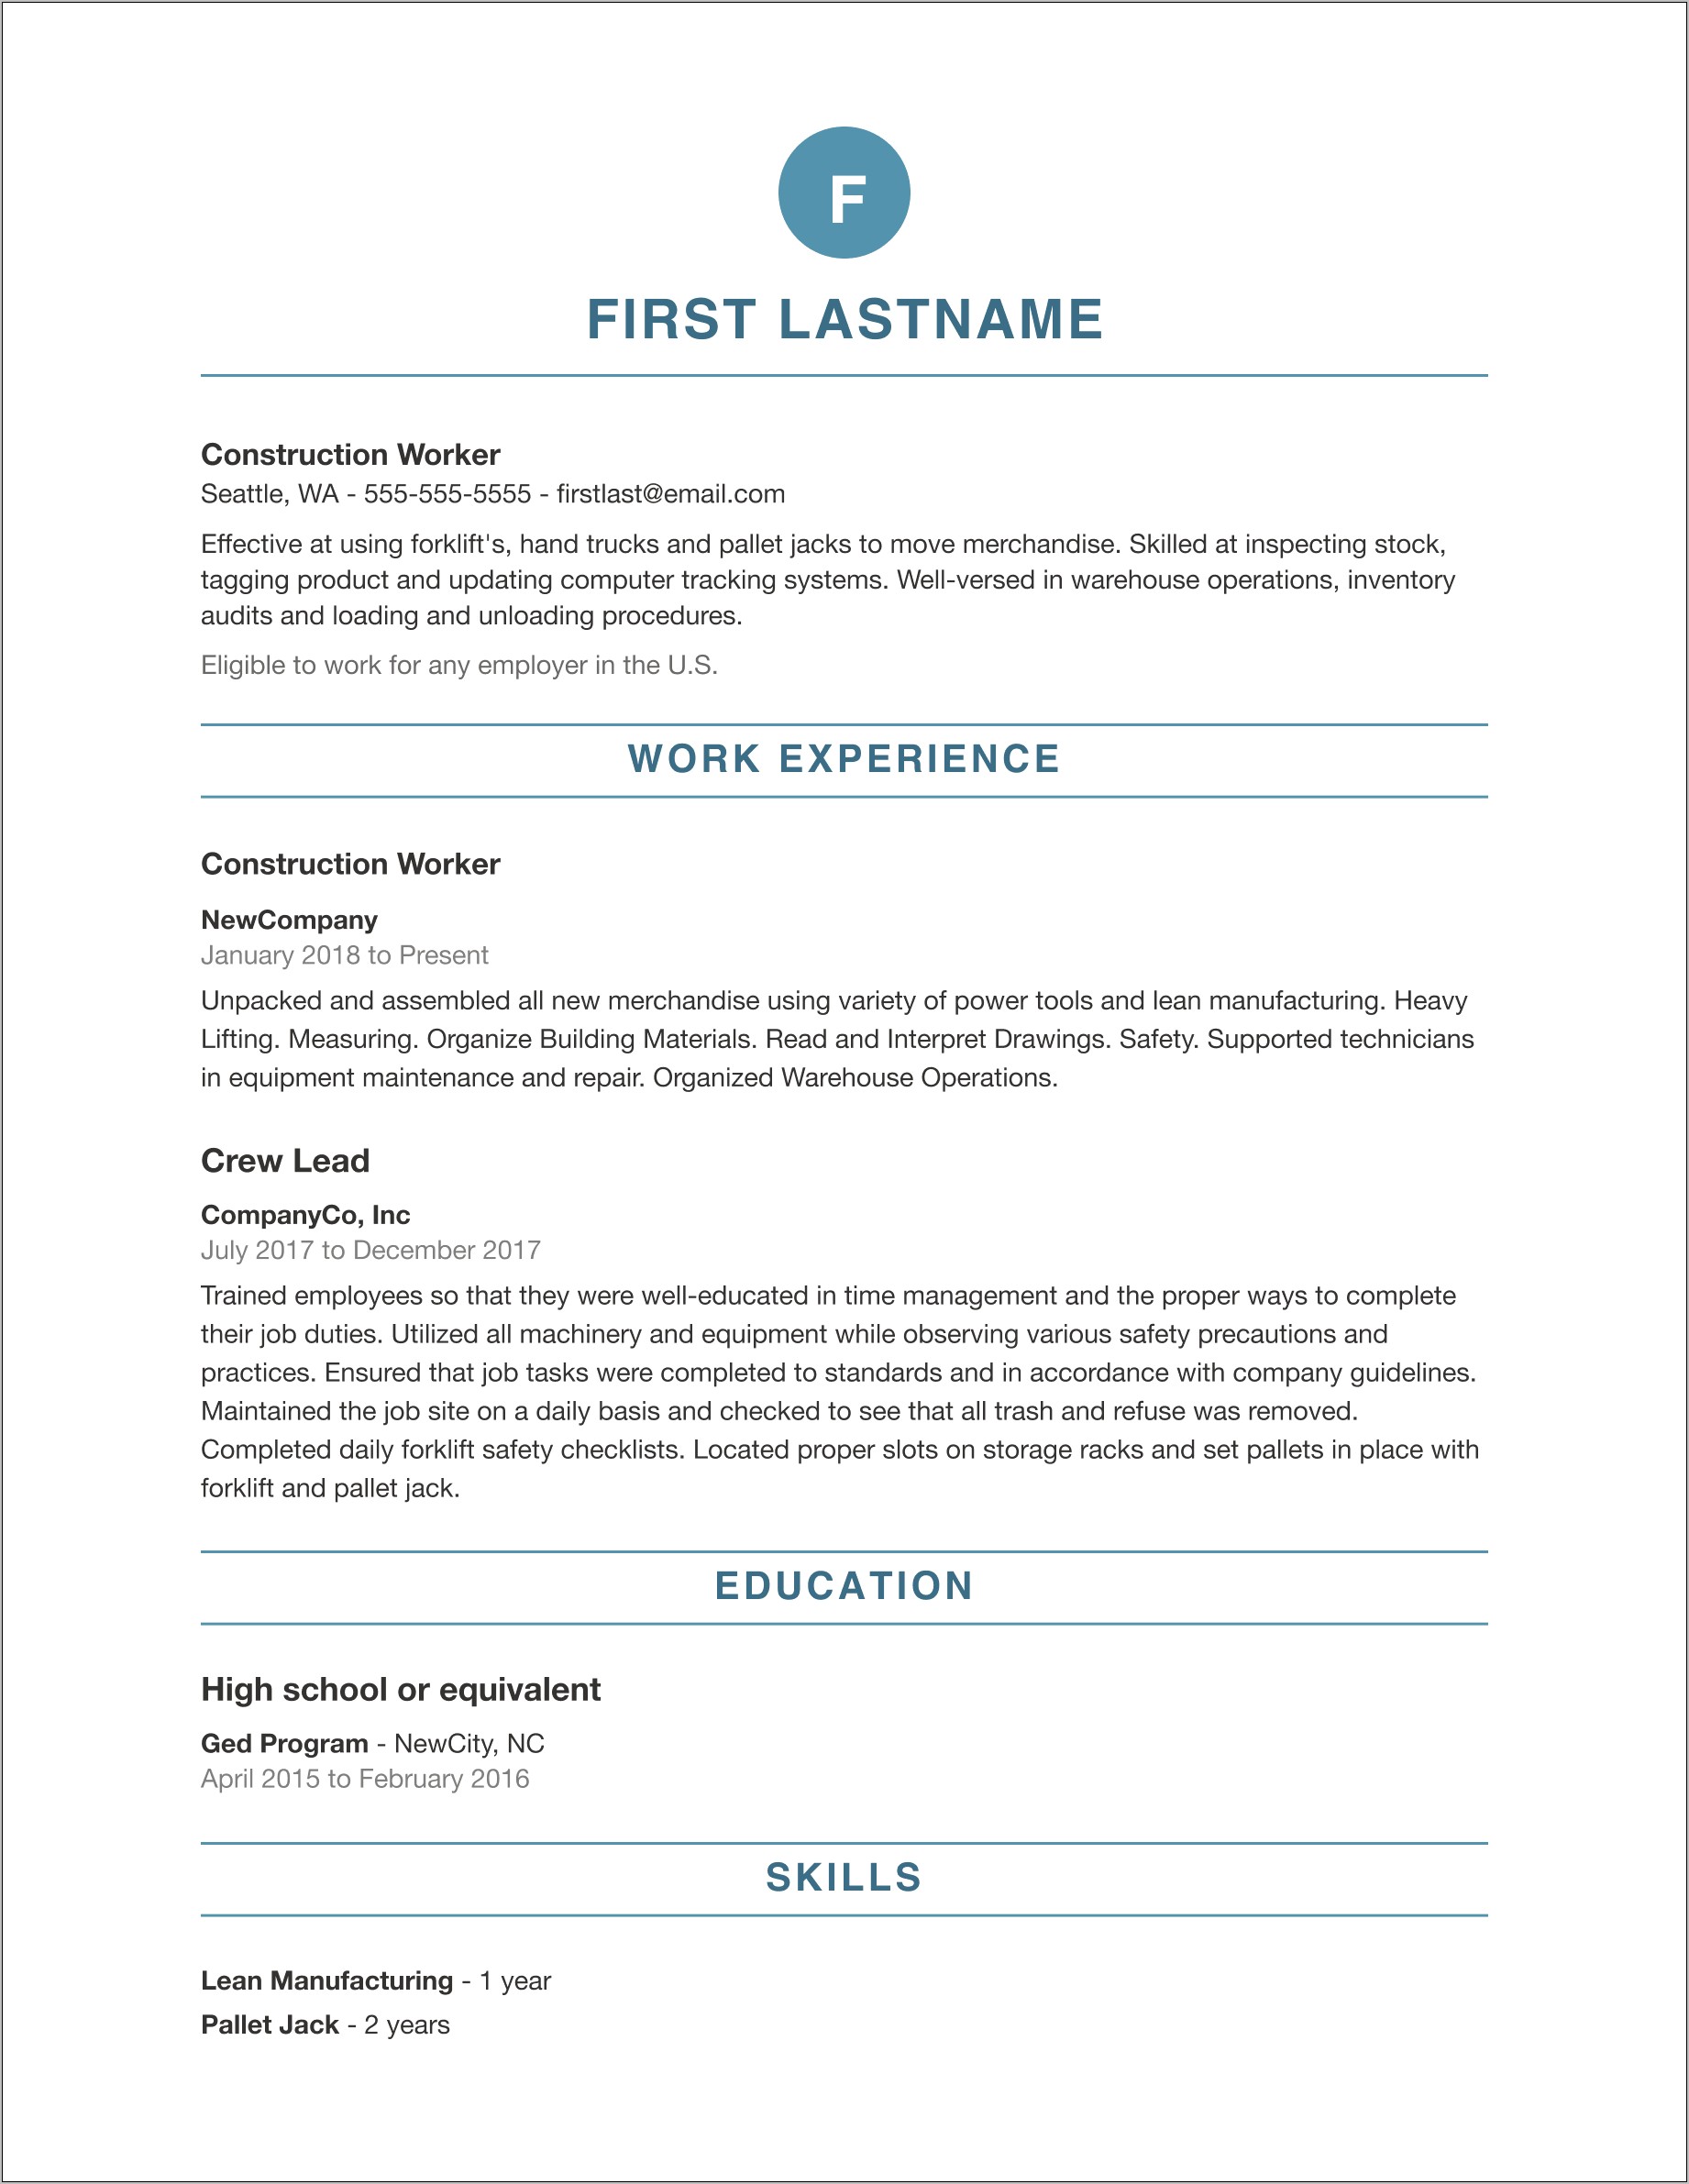 Create And Print Your Resume For Free